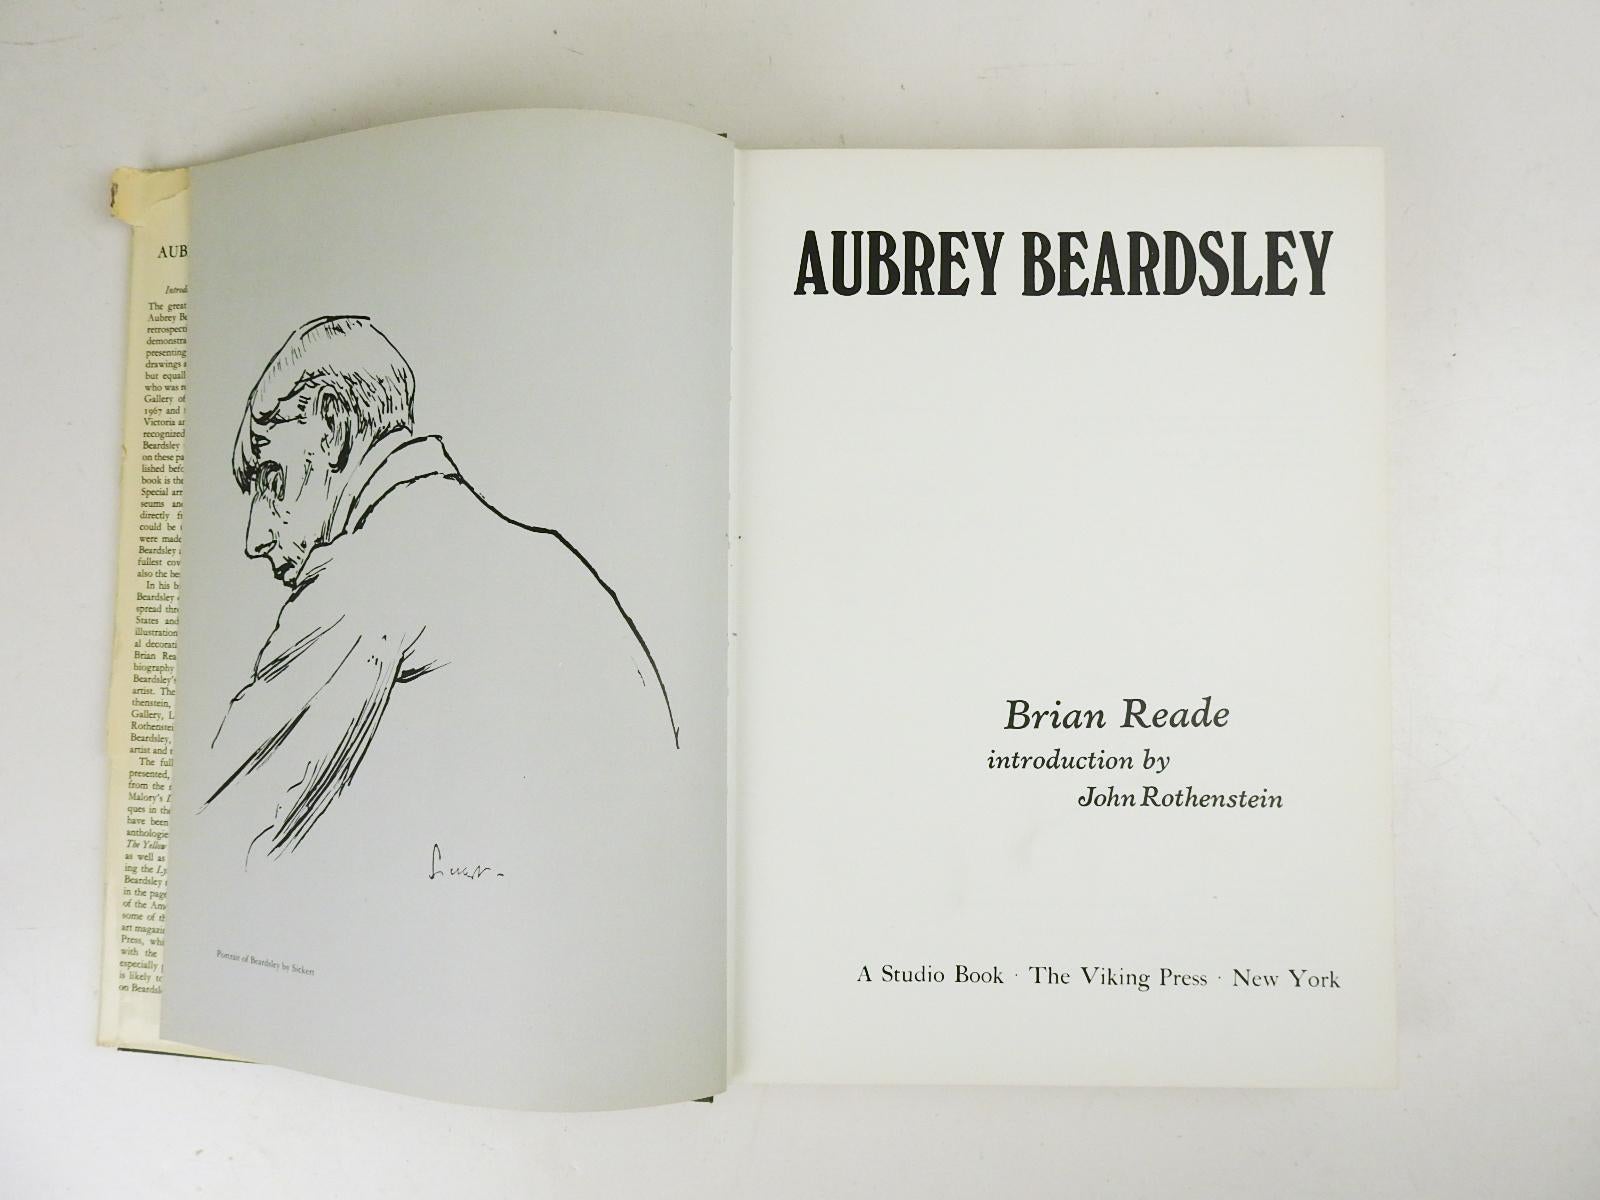 Aubrey Beardsley by Brian Reade.  Published by The Viking Press, New York, 1967.  An illuminating biography, and an engrossing analysis of Beardsley's aims and achievements as an artist